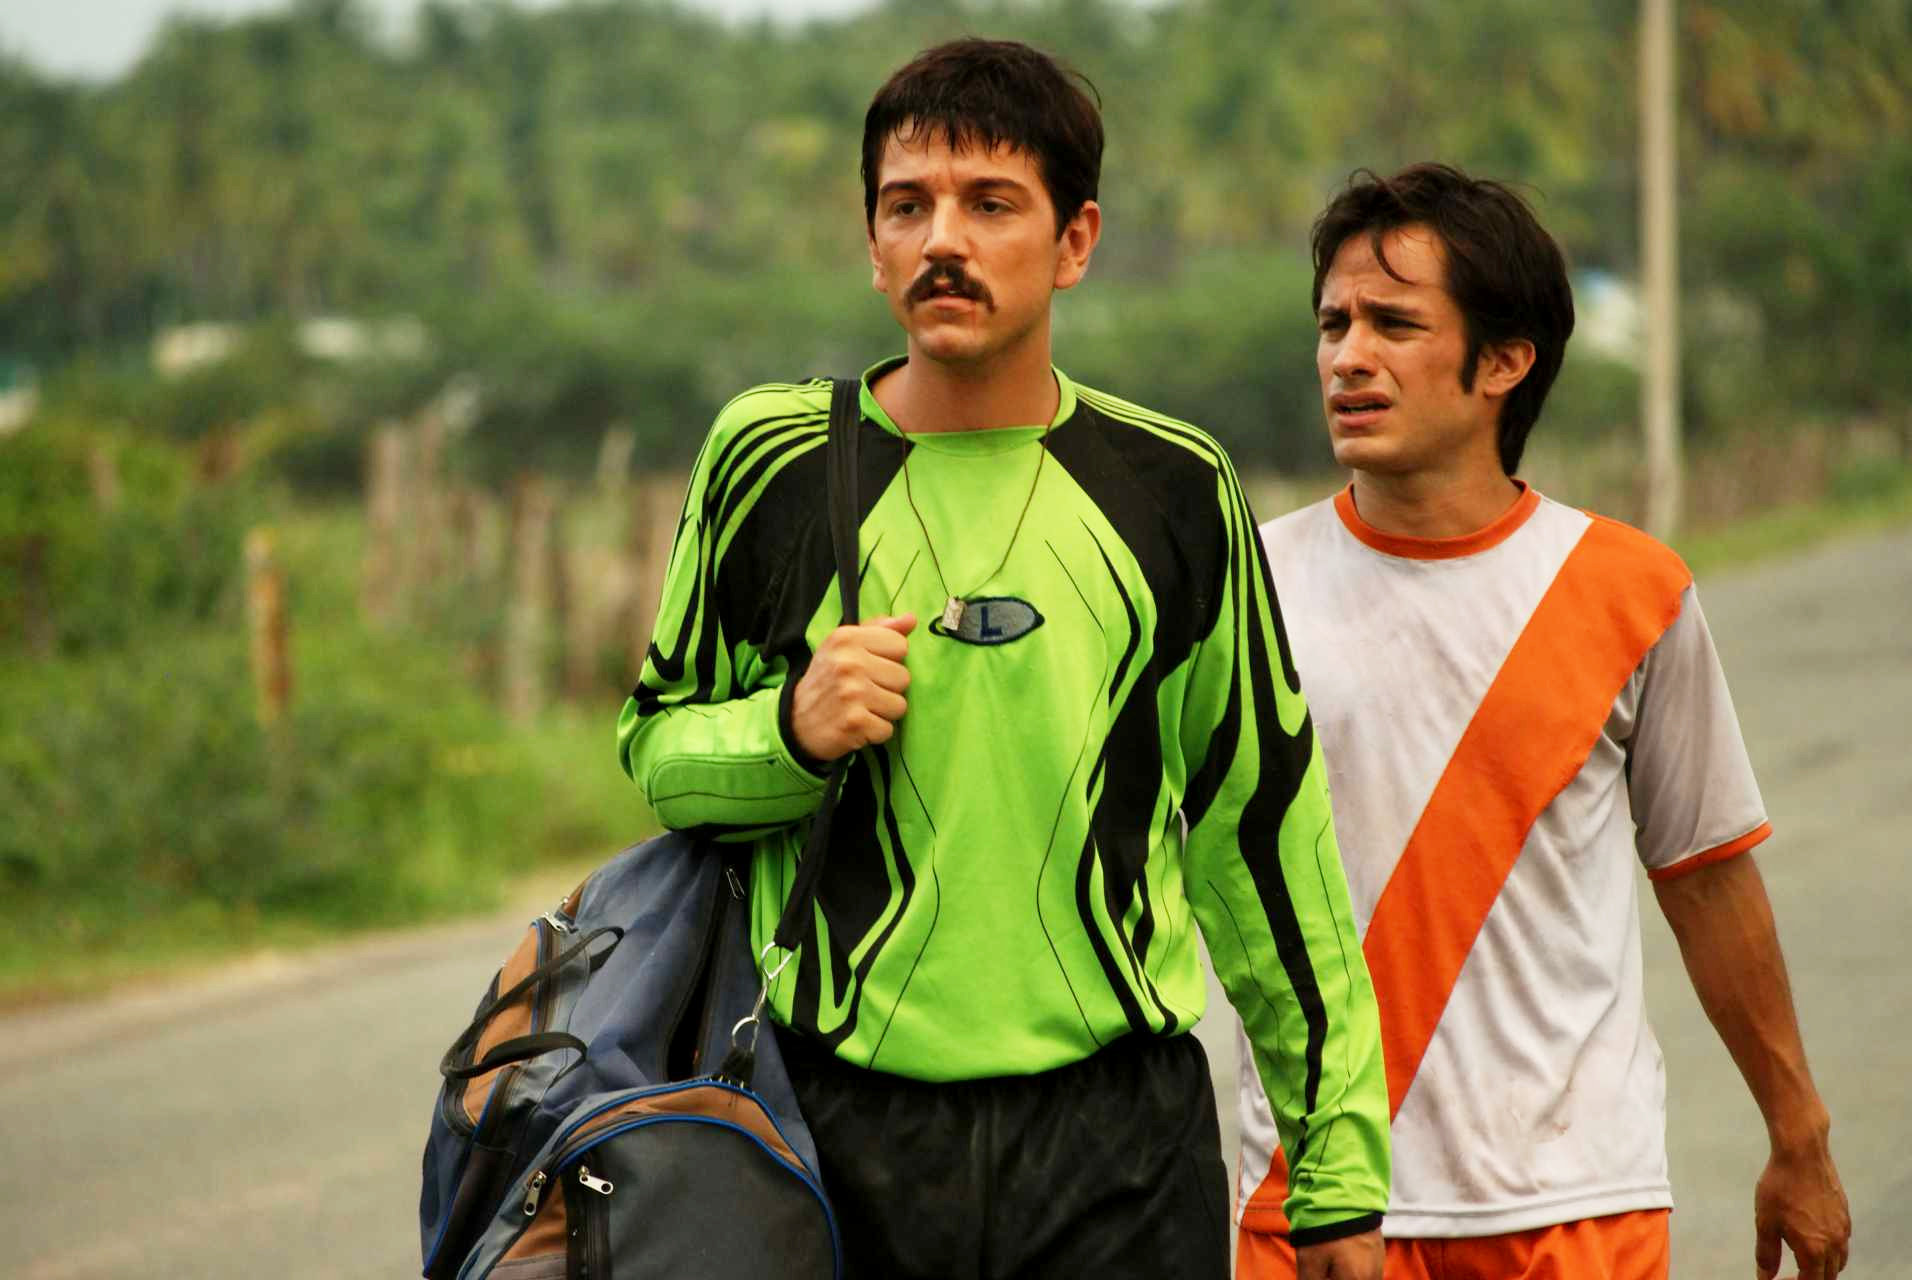 Diego Luna stars as Beto and Gael Garcia Bernal stars as Tato in Sony Pictures Classics' Rudo y Cursi (2009). Photo credit by Ivonne Venegas.